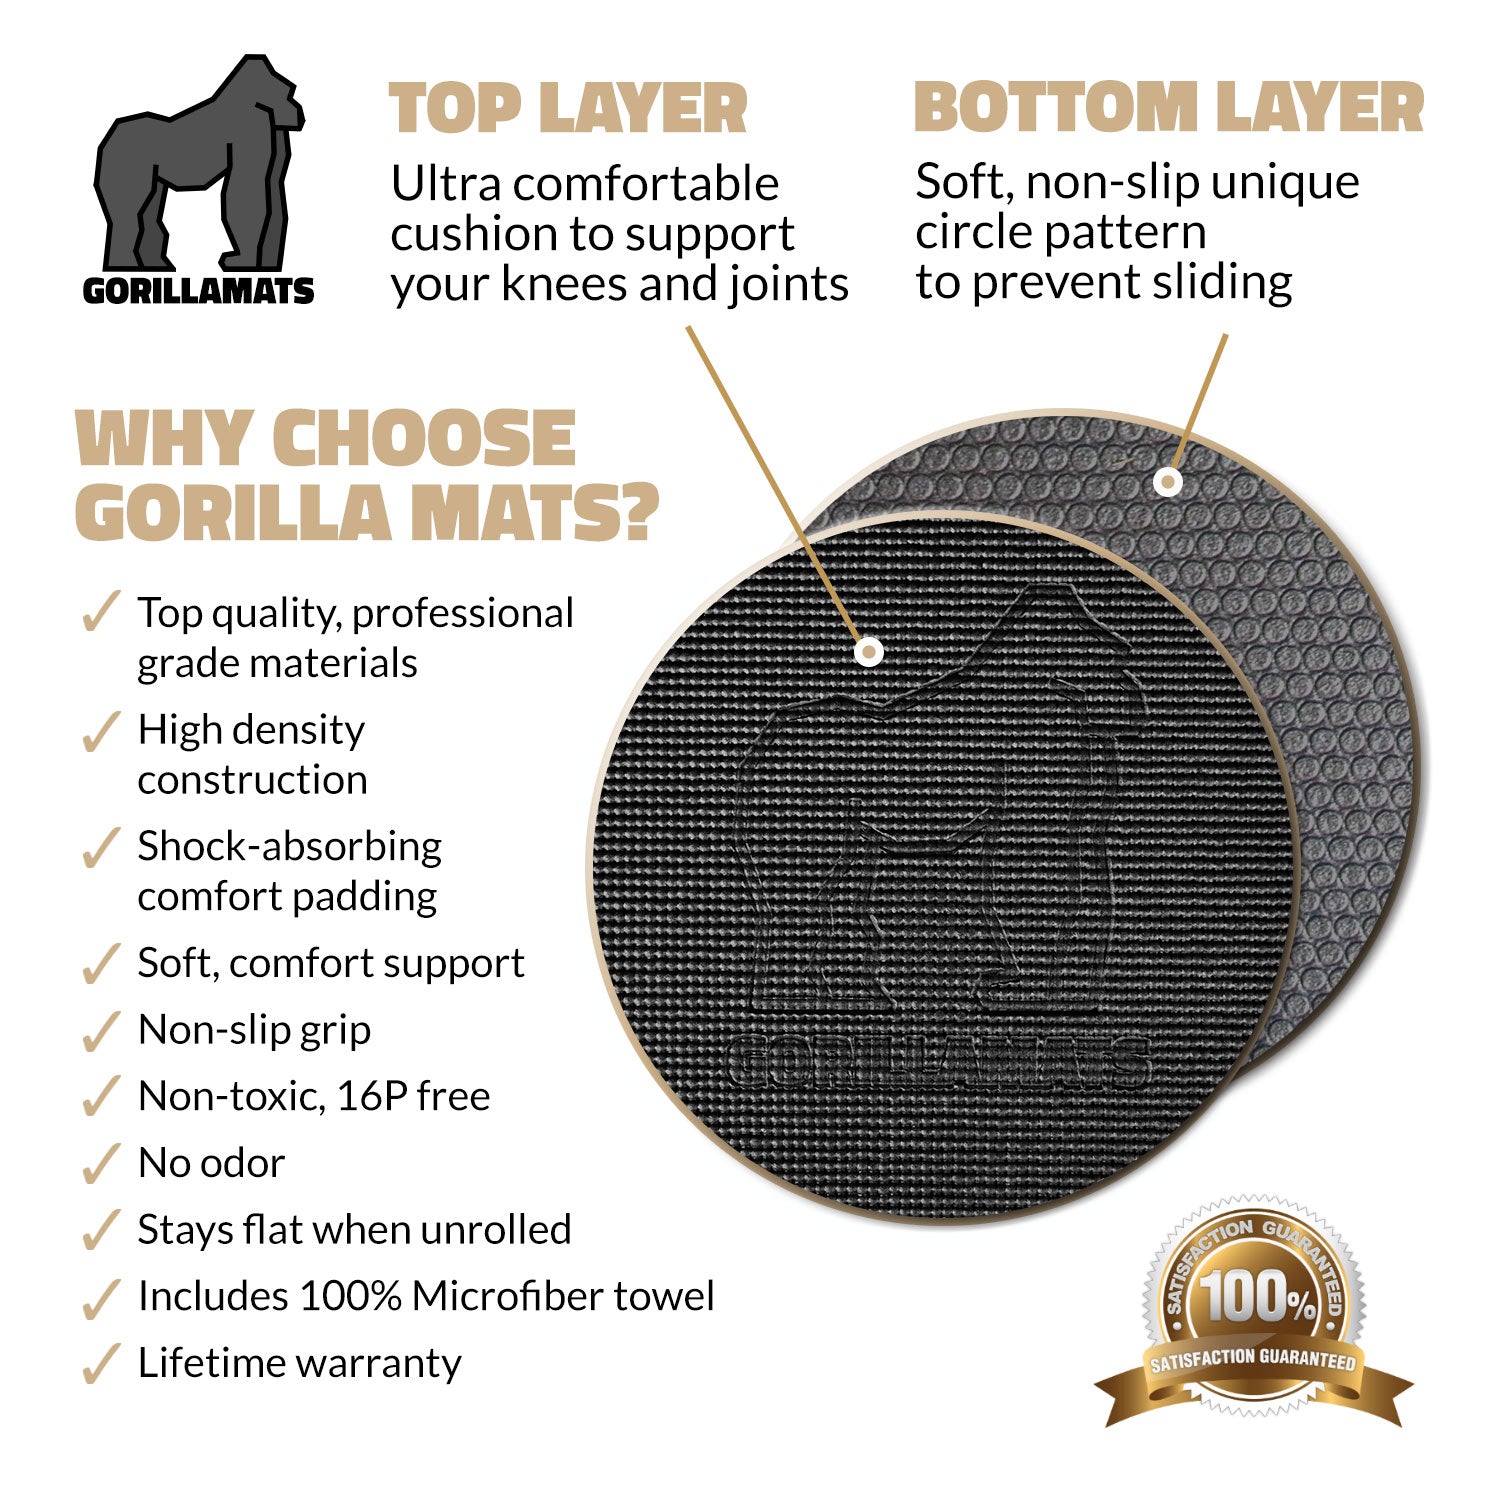 Gorilla Mats Premium Large Yoga Mat – 7' x 5' x 8mm Extra Thick & Ultra  Comfortable, Non-Toxic, Non-Slip Barefoot Exercise Mat – Works Great on Any